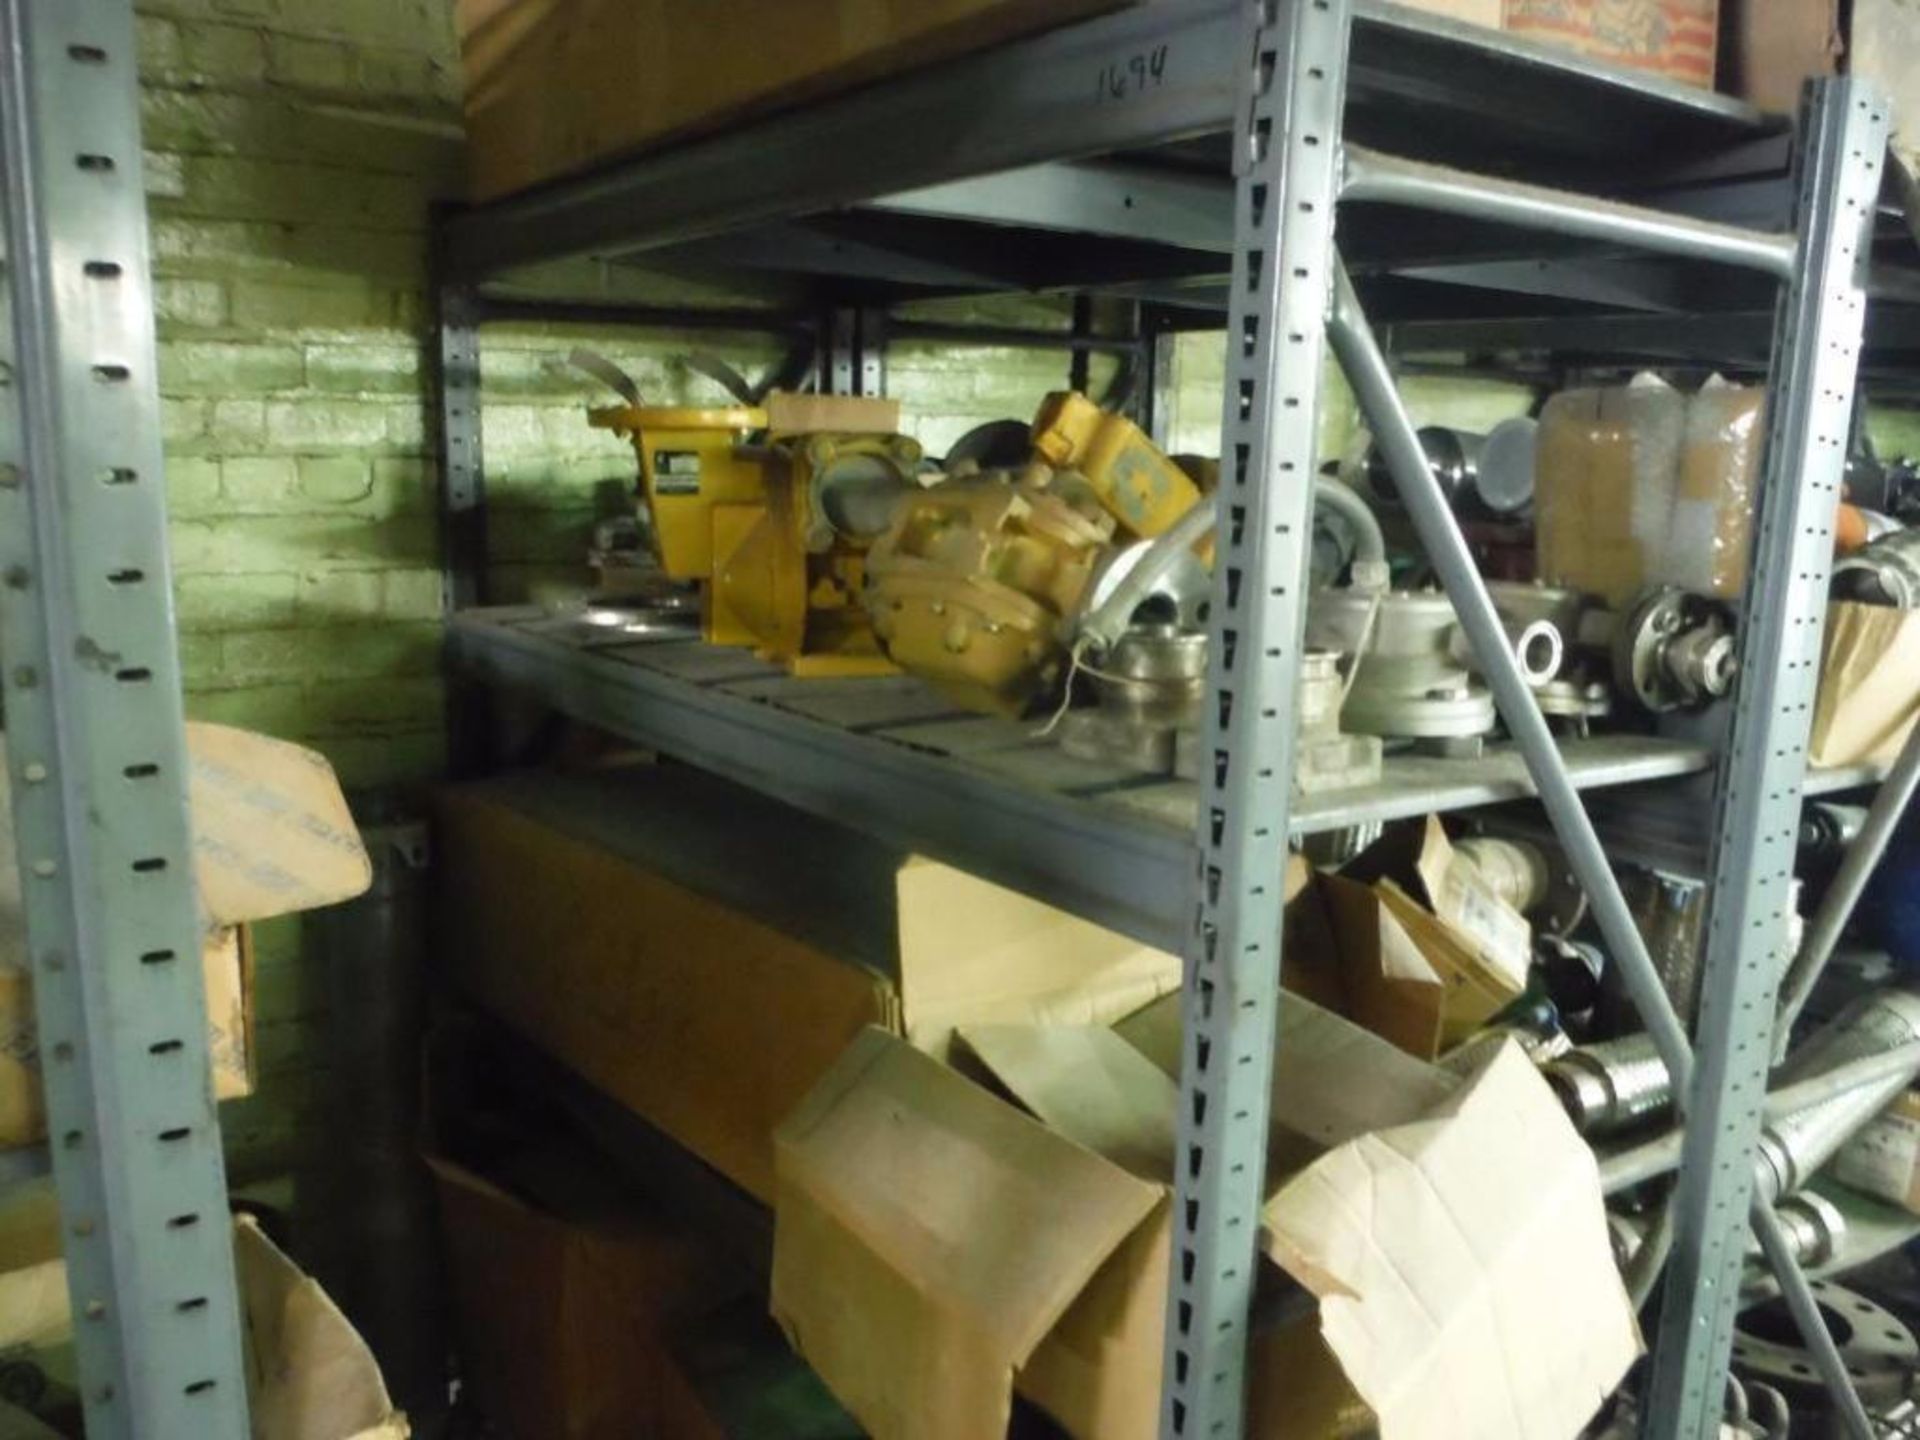 10 Shelves & content: Miscellaneous valves, fittings, brushes, and parts  Rigging Fee: $1000 - Image 12 of 14